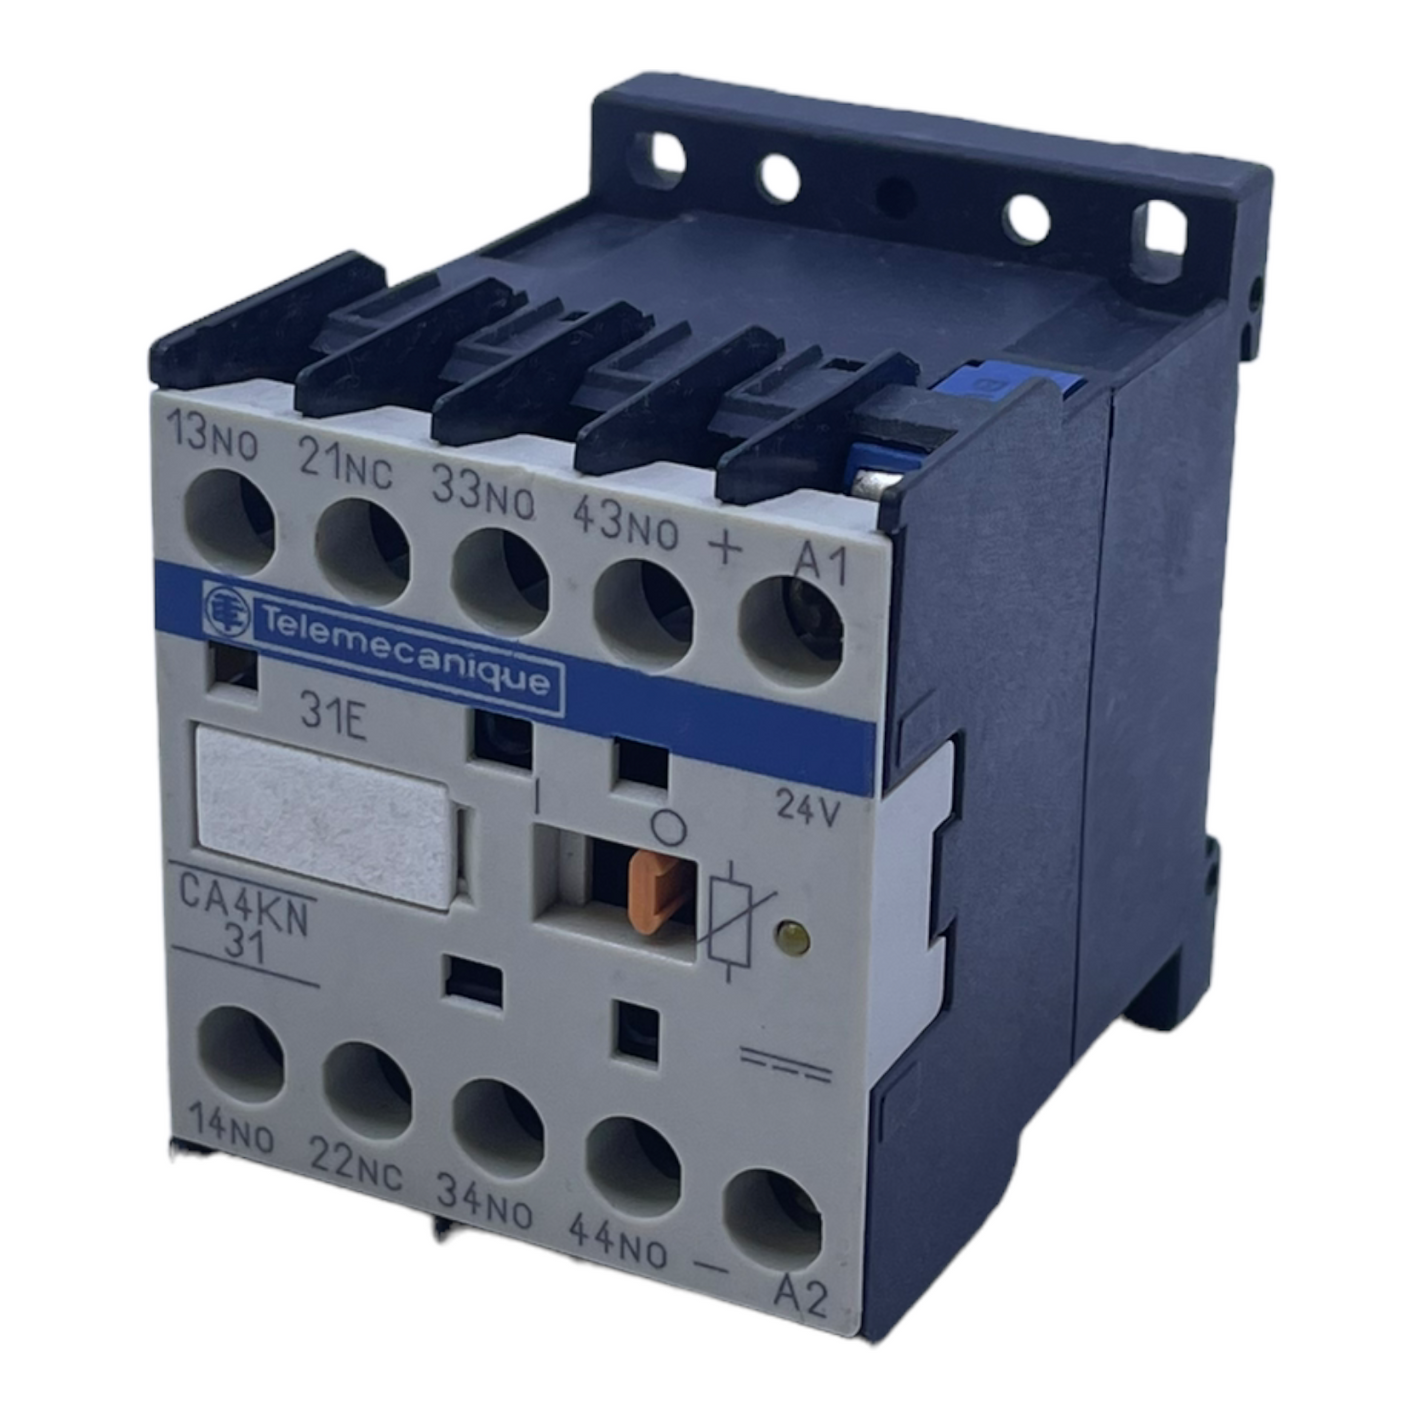 Telemecanique CA4KN31 auxiliary contactor 24V 